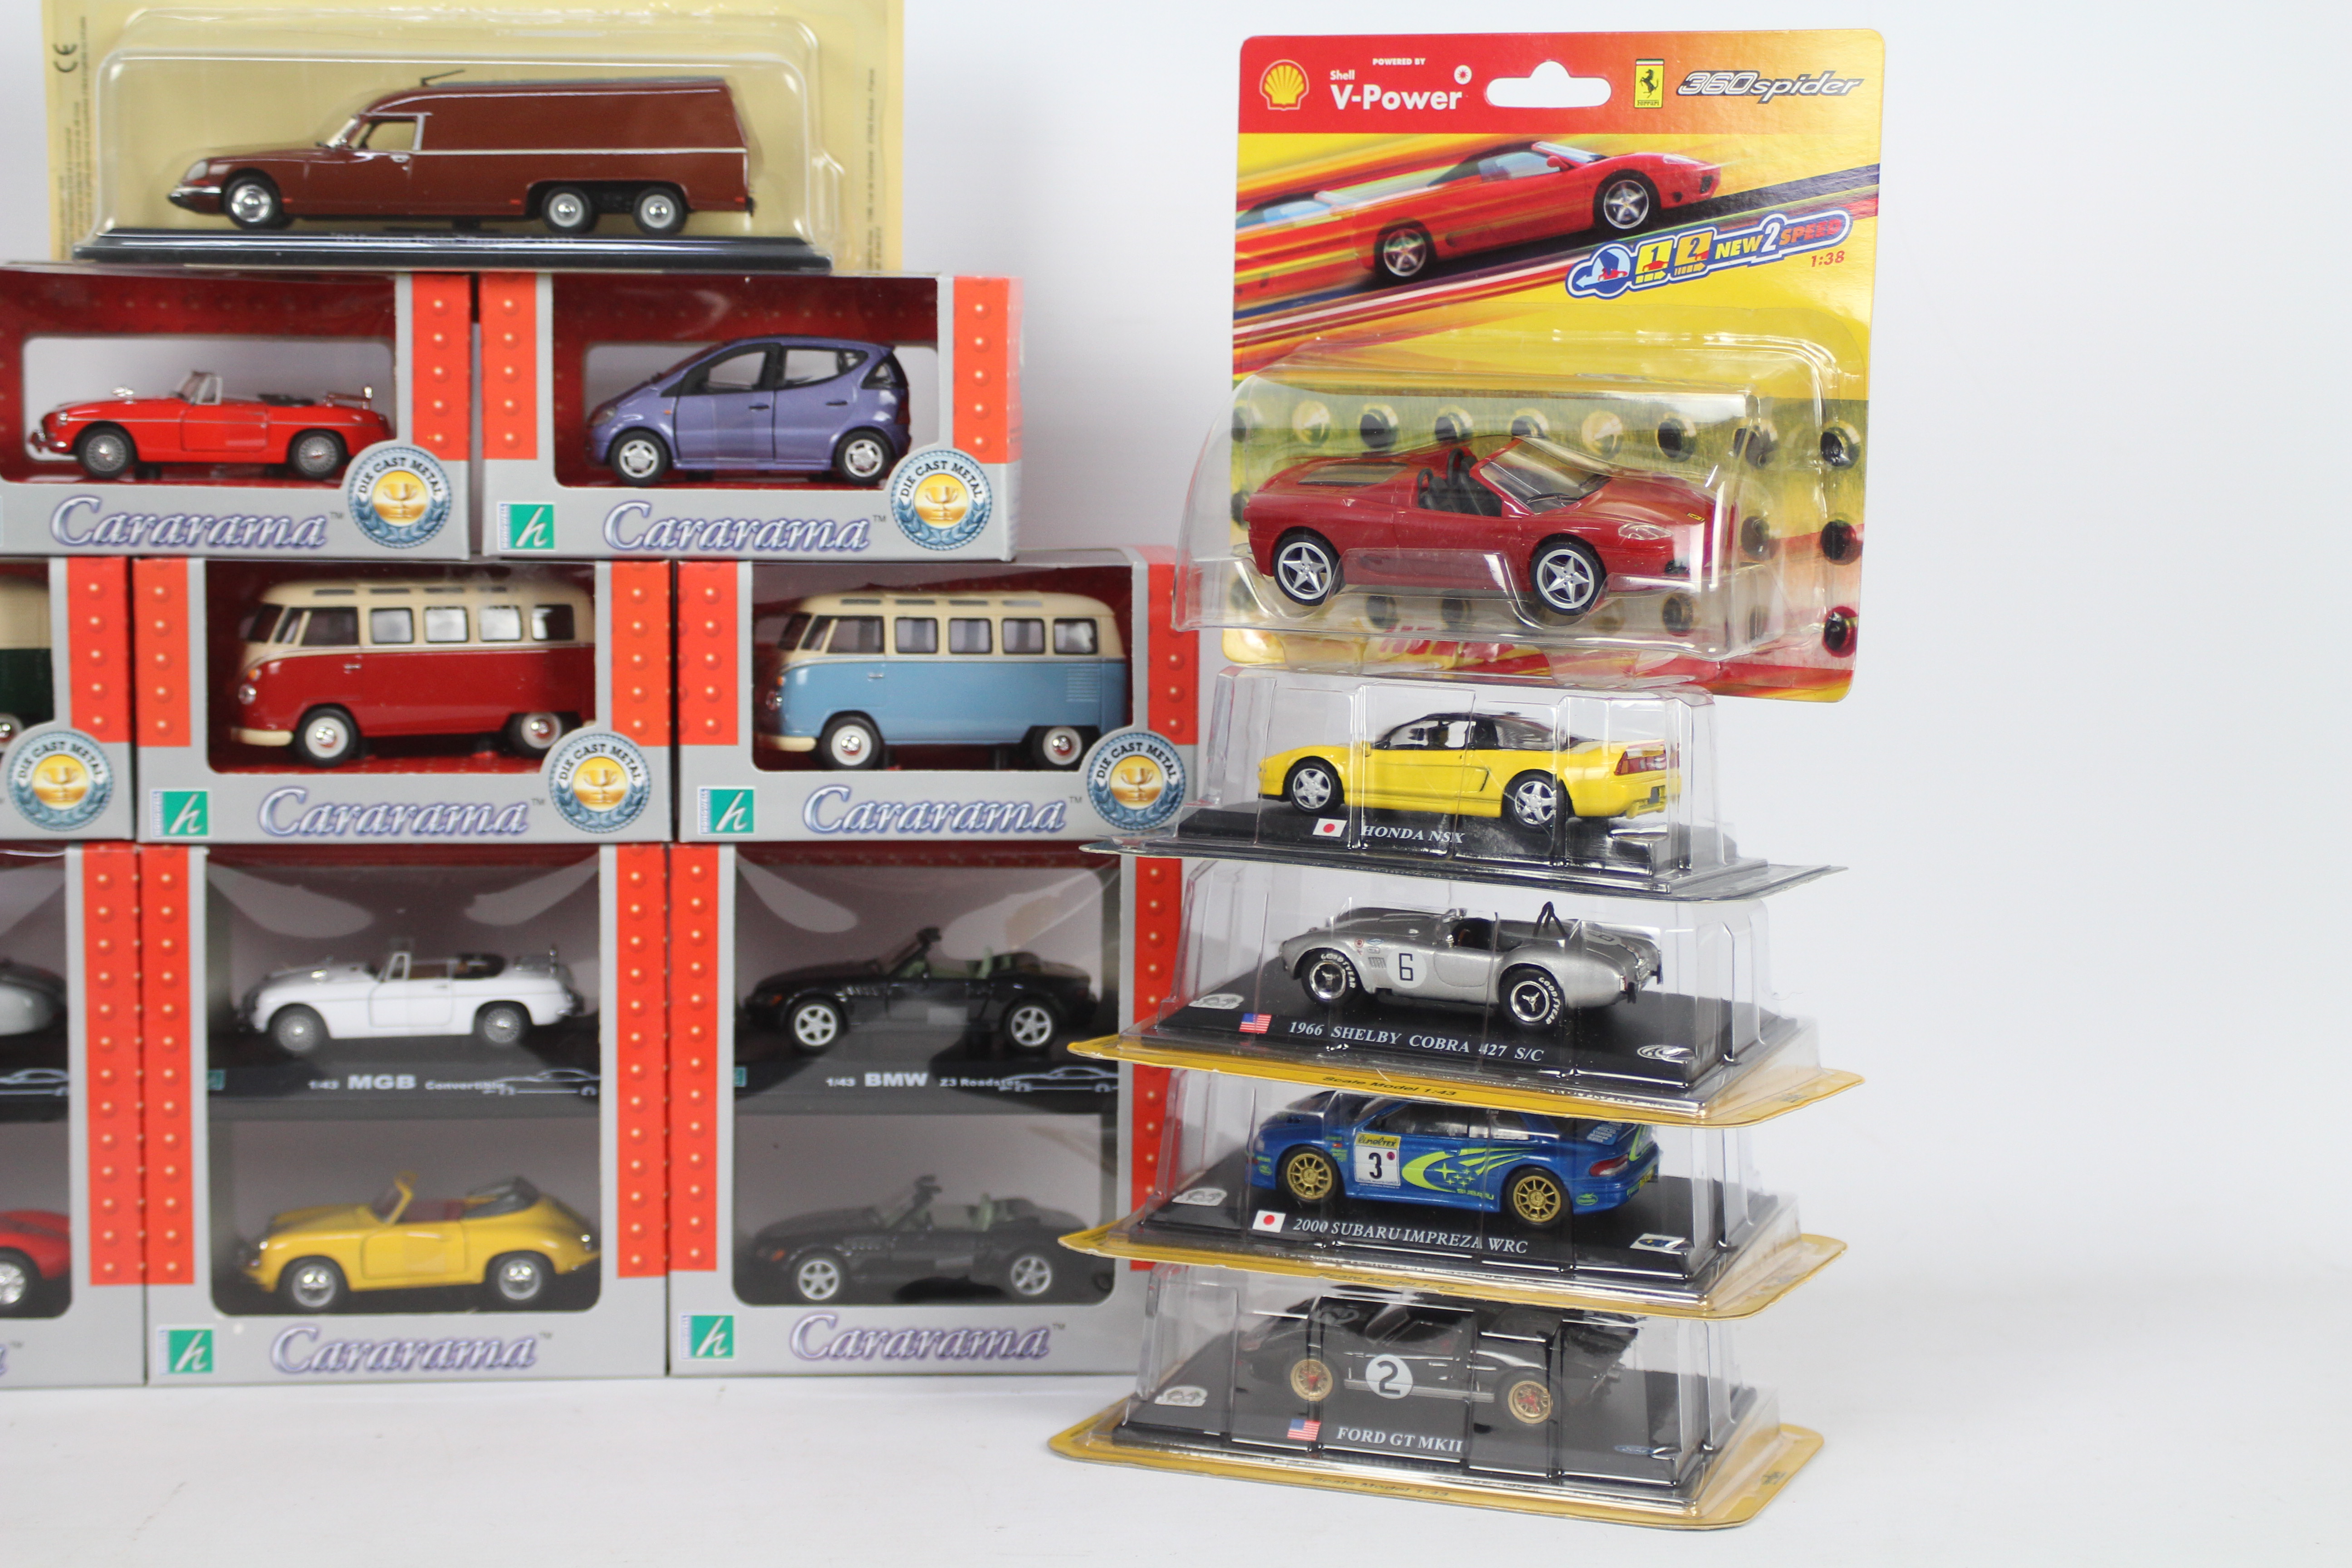 Cararama - Altaya - 20 x diecast vehicles in 1:43 scale including 2 x Volkswagen Bus models, - Image 3 of 4